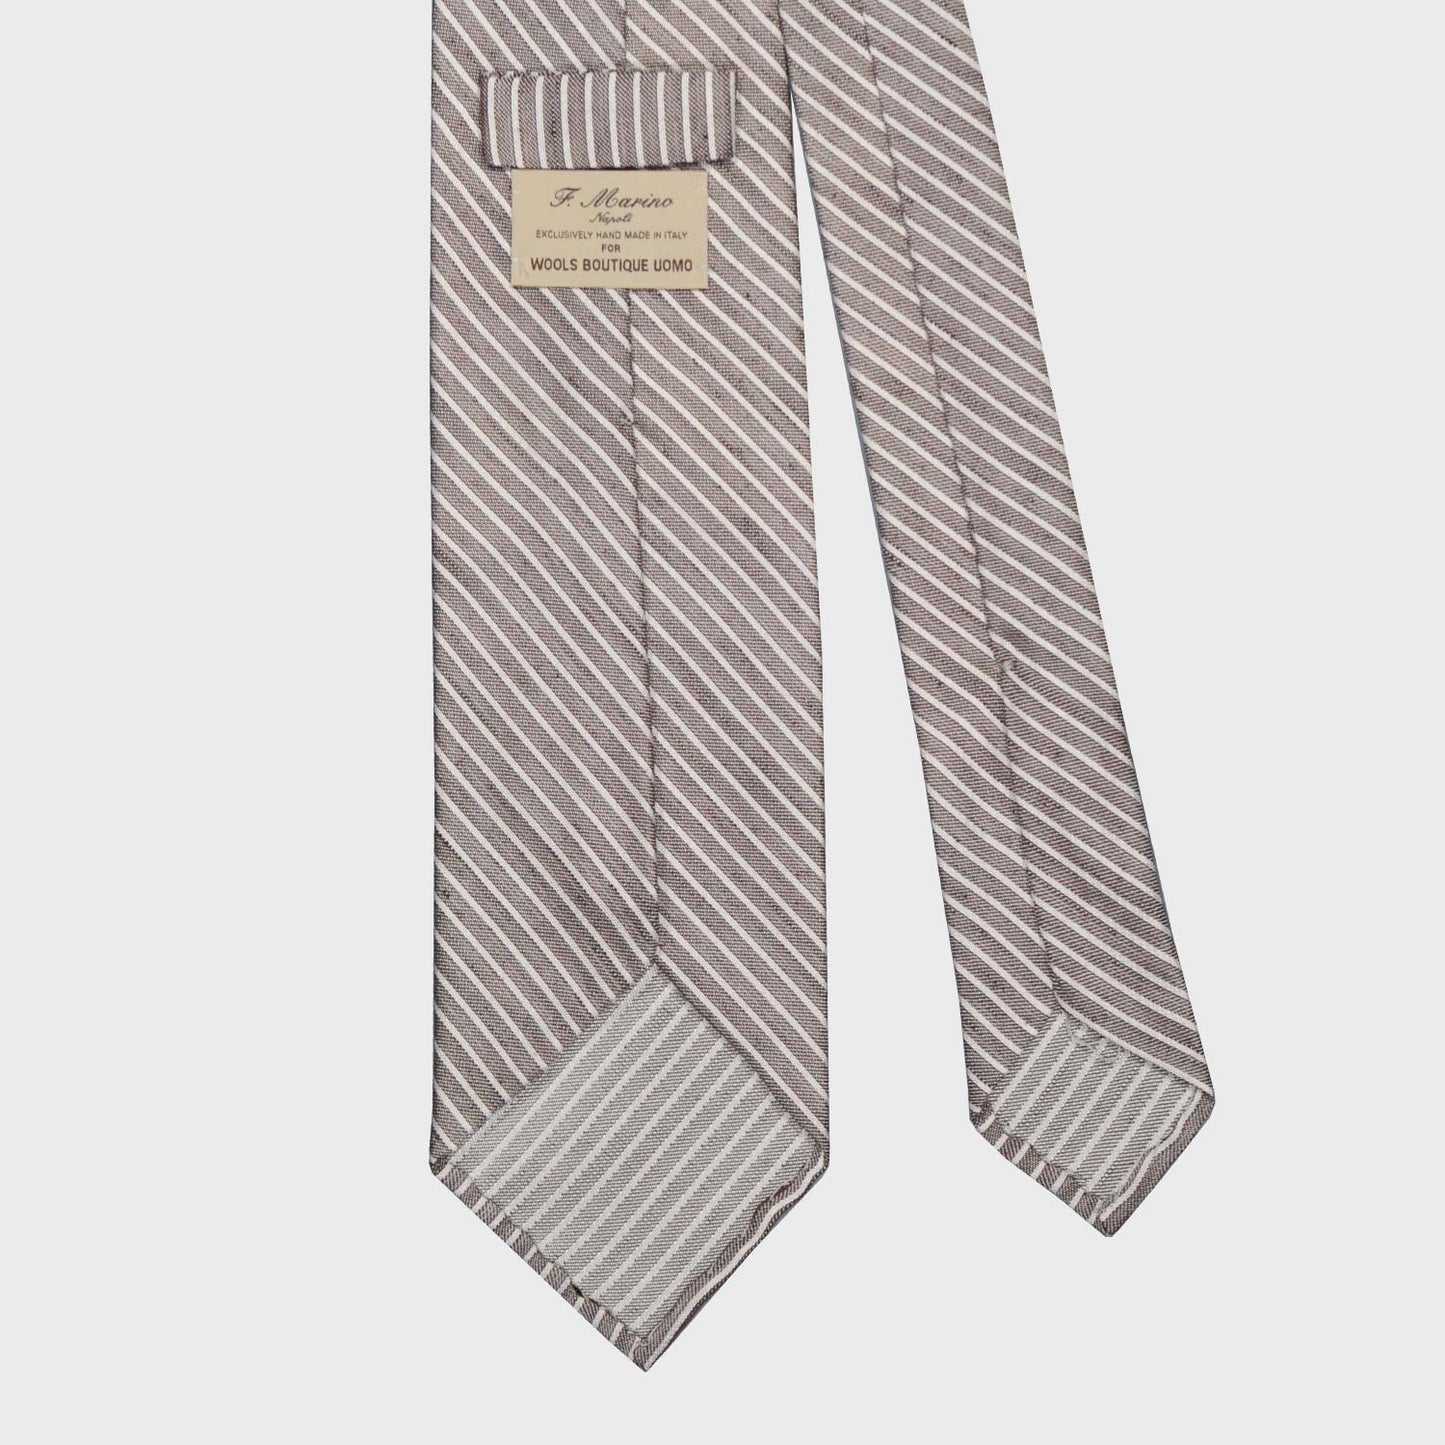 Load image into Gallery viewer, F.Marino Stripes Shantung Silk Tie 3 Folds Taupe-Wools Boutique Uomo
